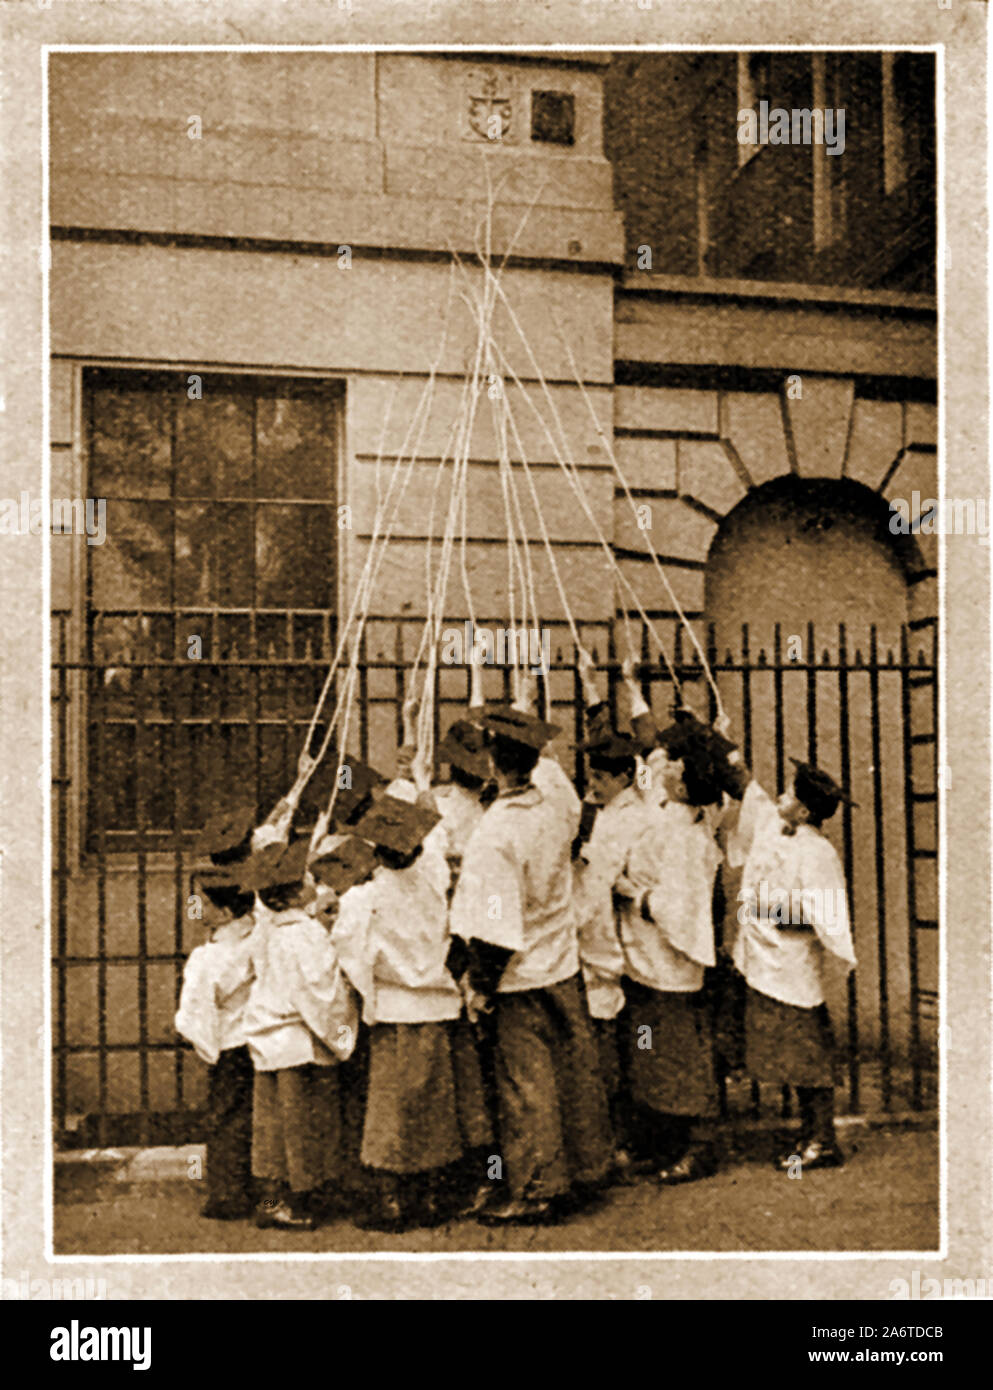 Traditional British often annual customs and ceremonies. - A circa 1940 photograph of the choristers of St Clement Danes, London beating the bounds (marking the parish boundary) using long sticks or 'willow wands' Stock Photo